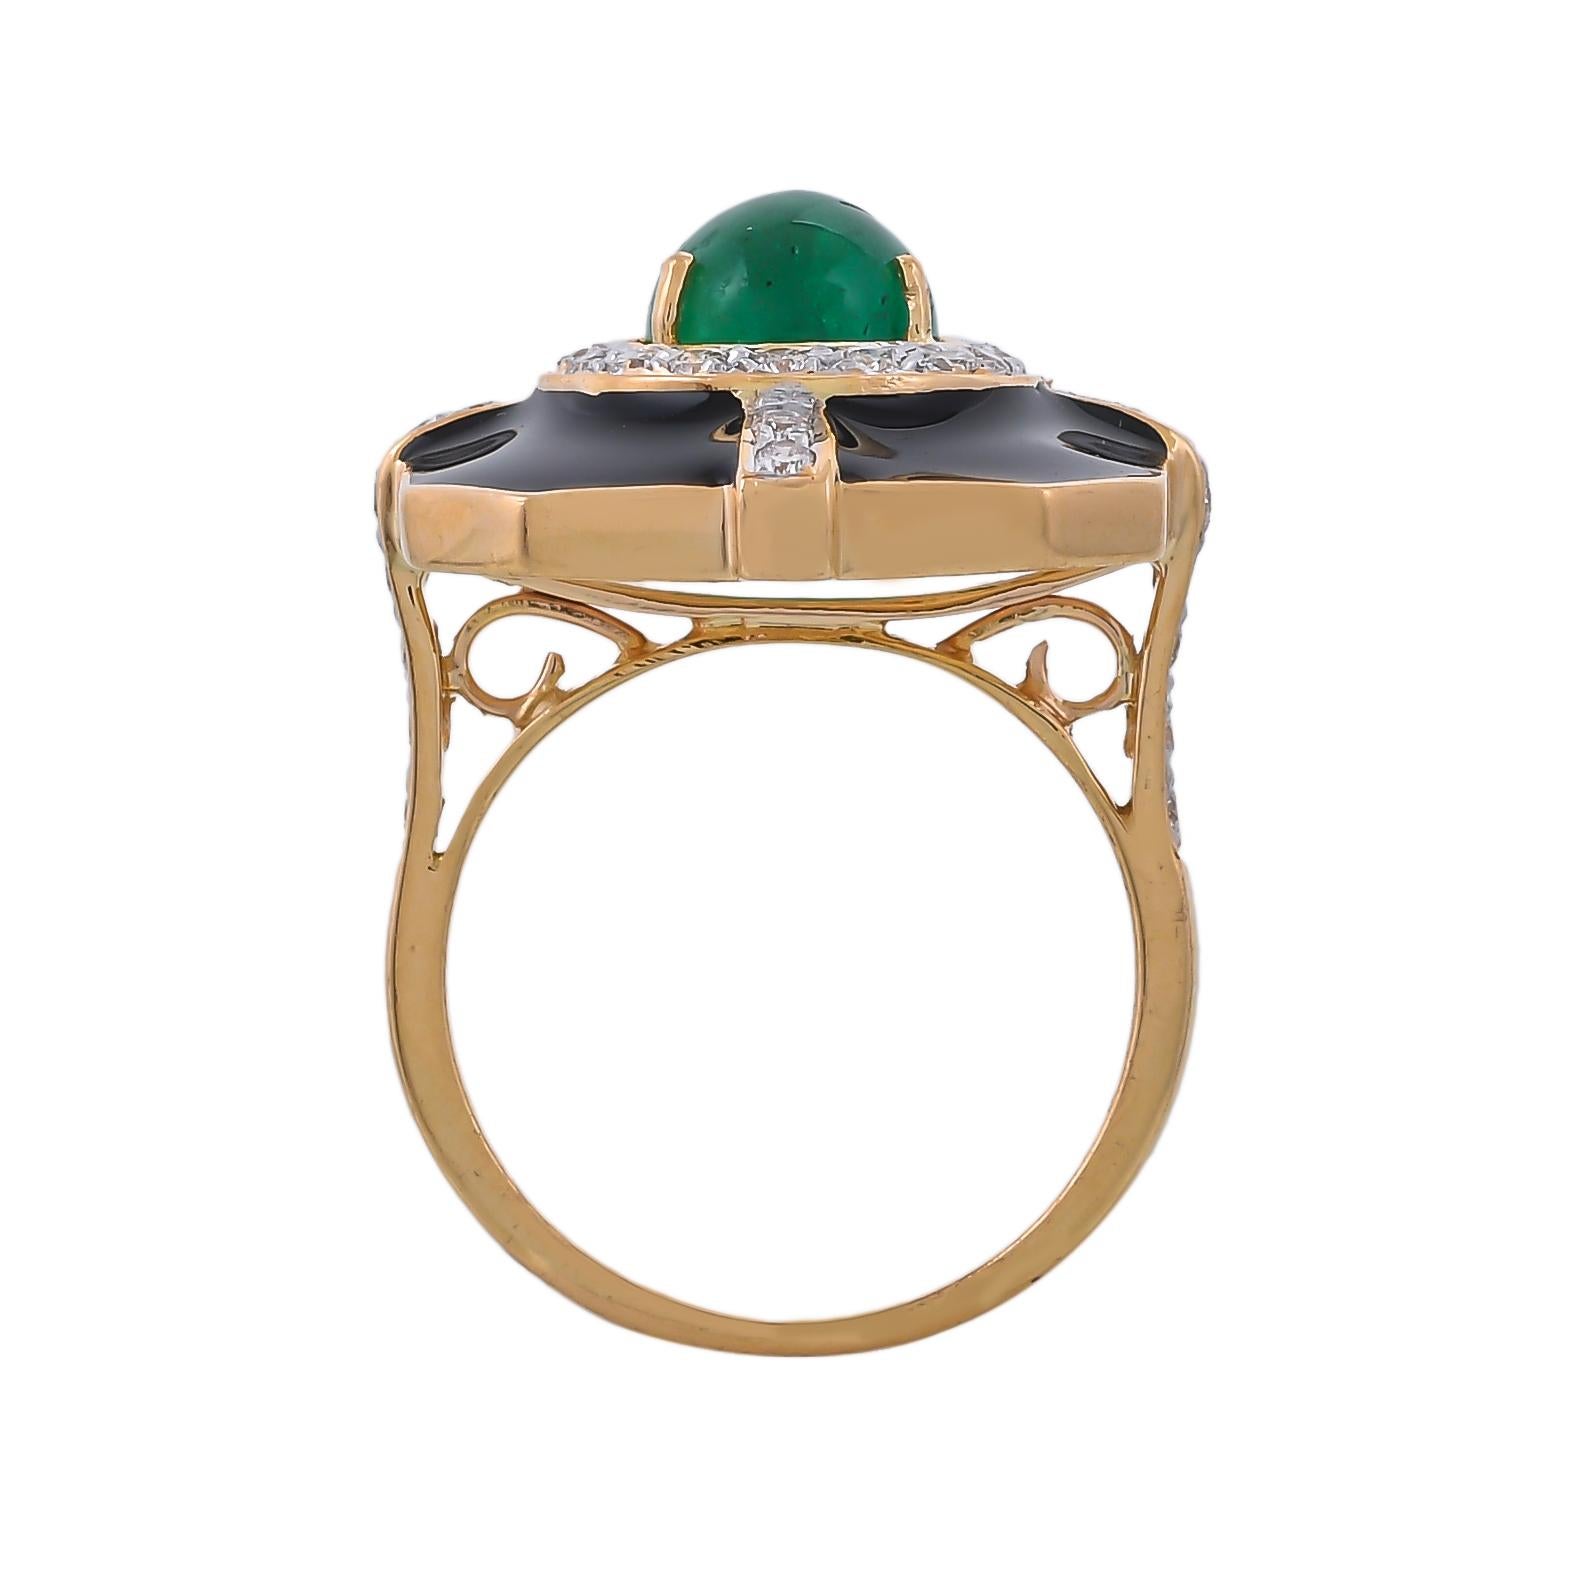 Modern and stylish this 18 karat ring features a bold, geometric shape set with the eccentric combination of 2.57 carats emerald surrounded by sparkling white 0.47 carats diamonds and solid black enamel, highlights this statement yellow gold